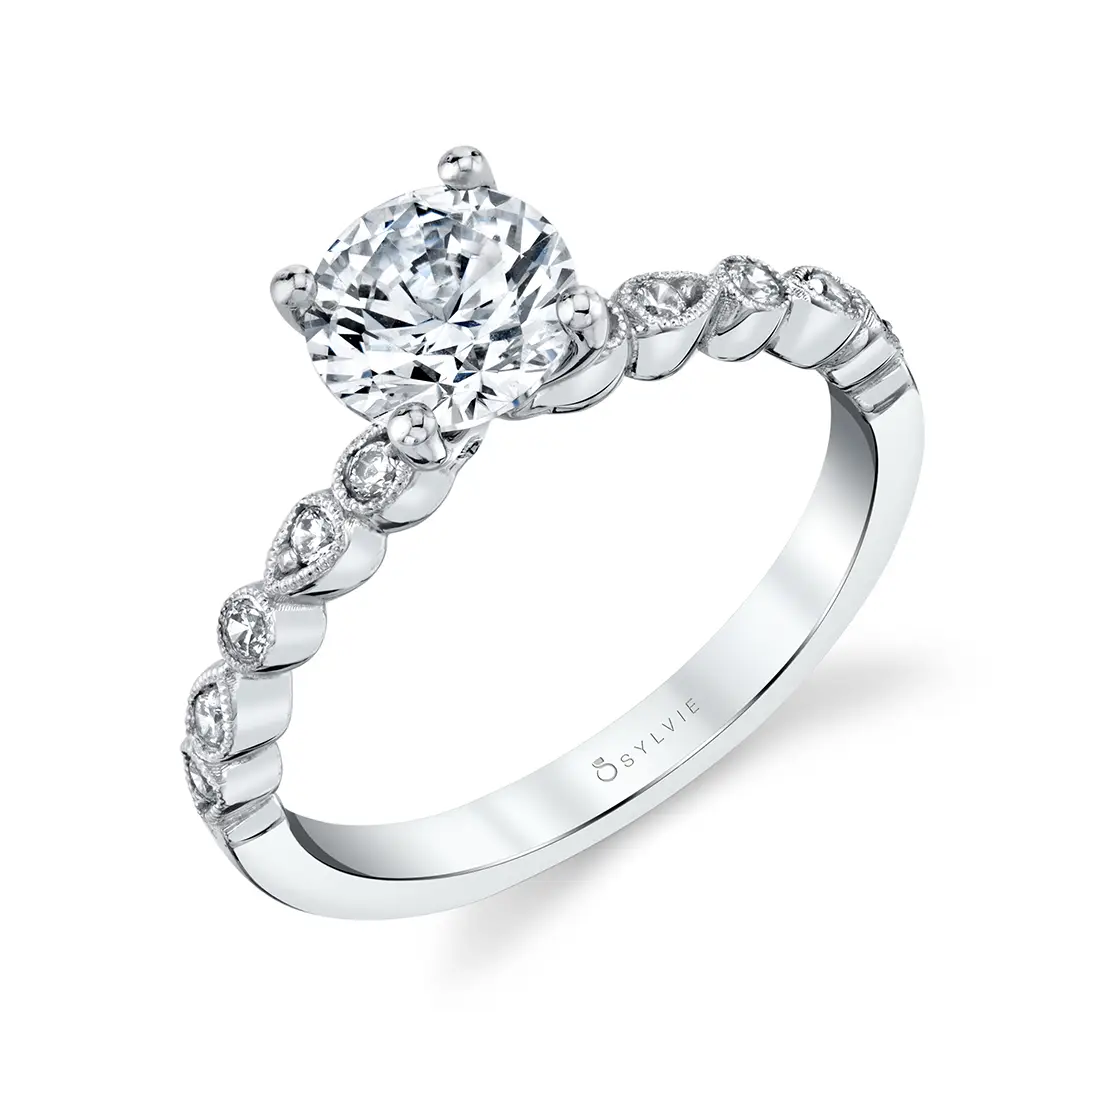 Profile image of a Unique Stackable Engagement Ring